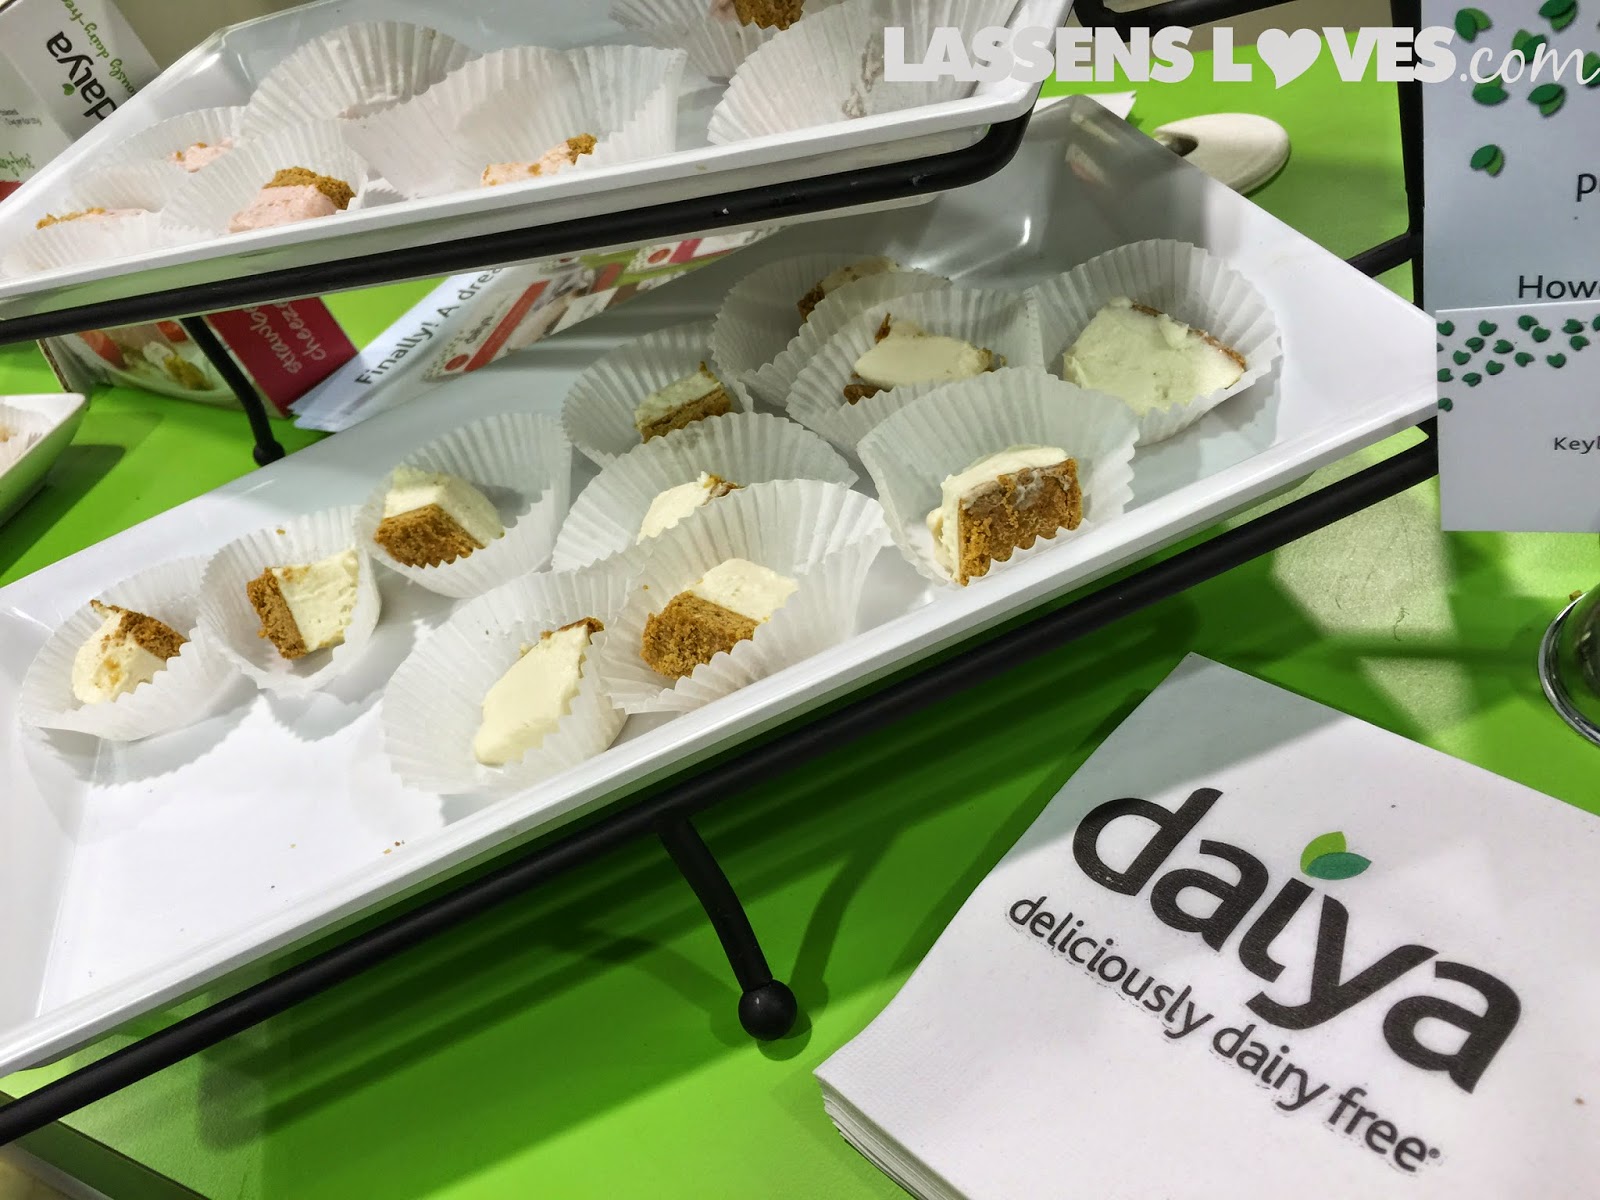 Expo+West+2015, Natural+Foods+Show, New+Natural+Products, daiya+cheesecake, dairy+free+diet, no+dairy+treats